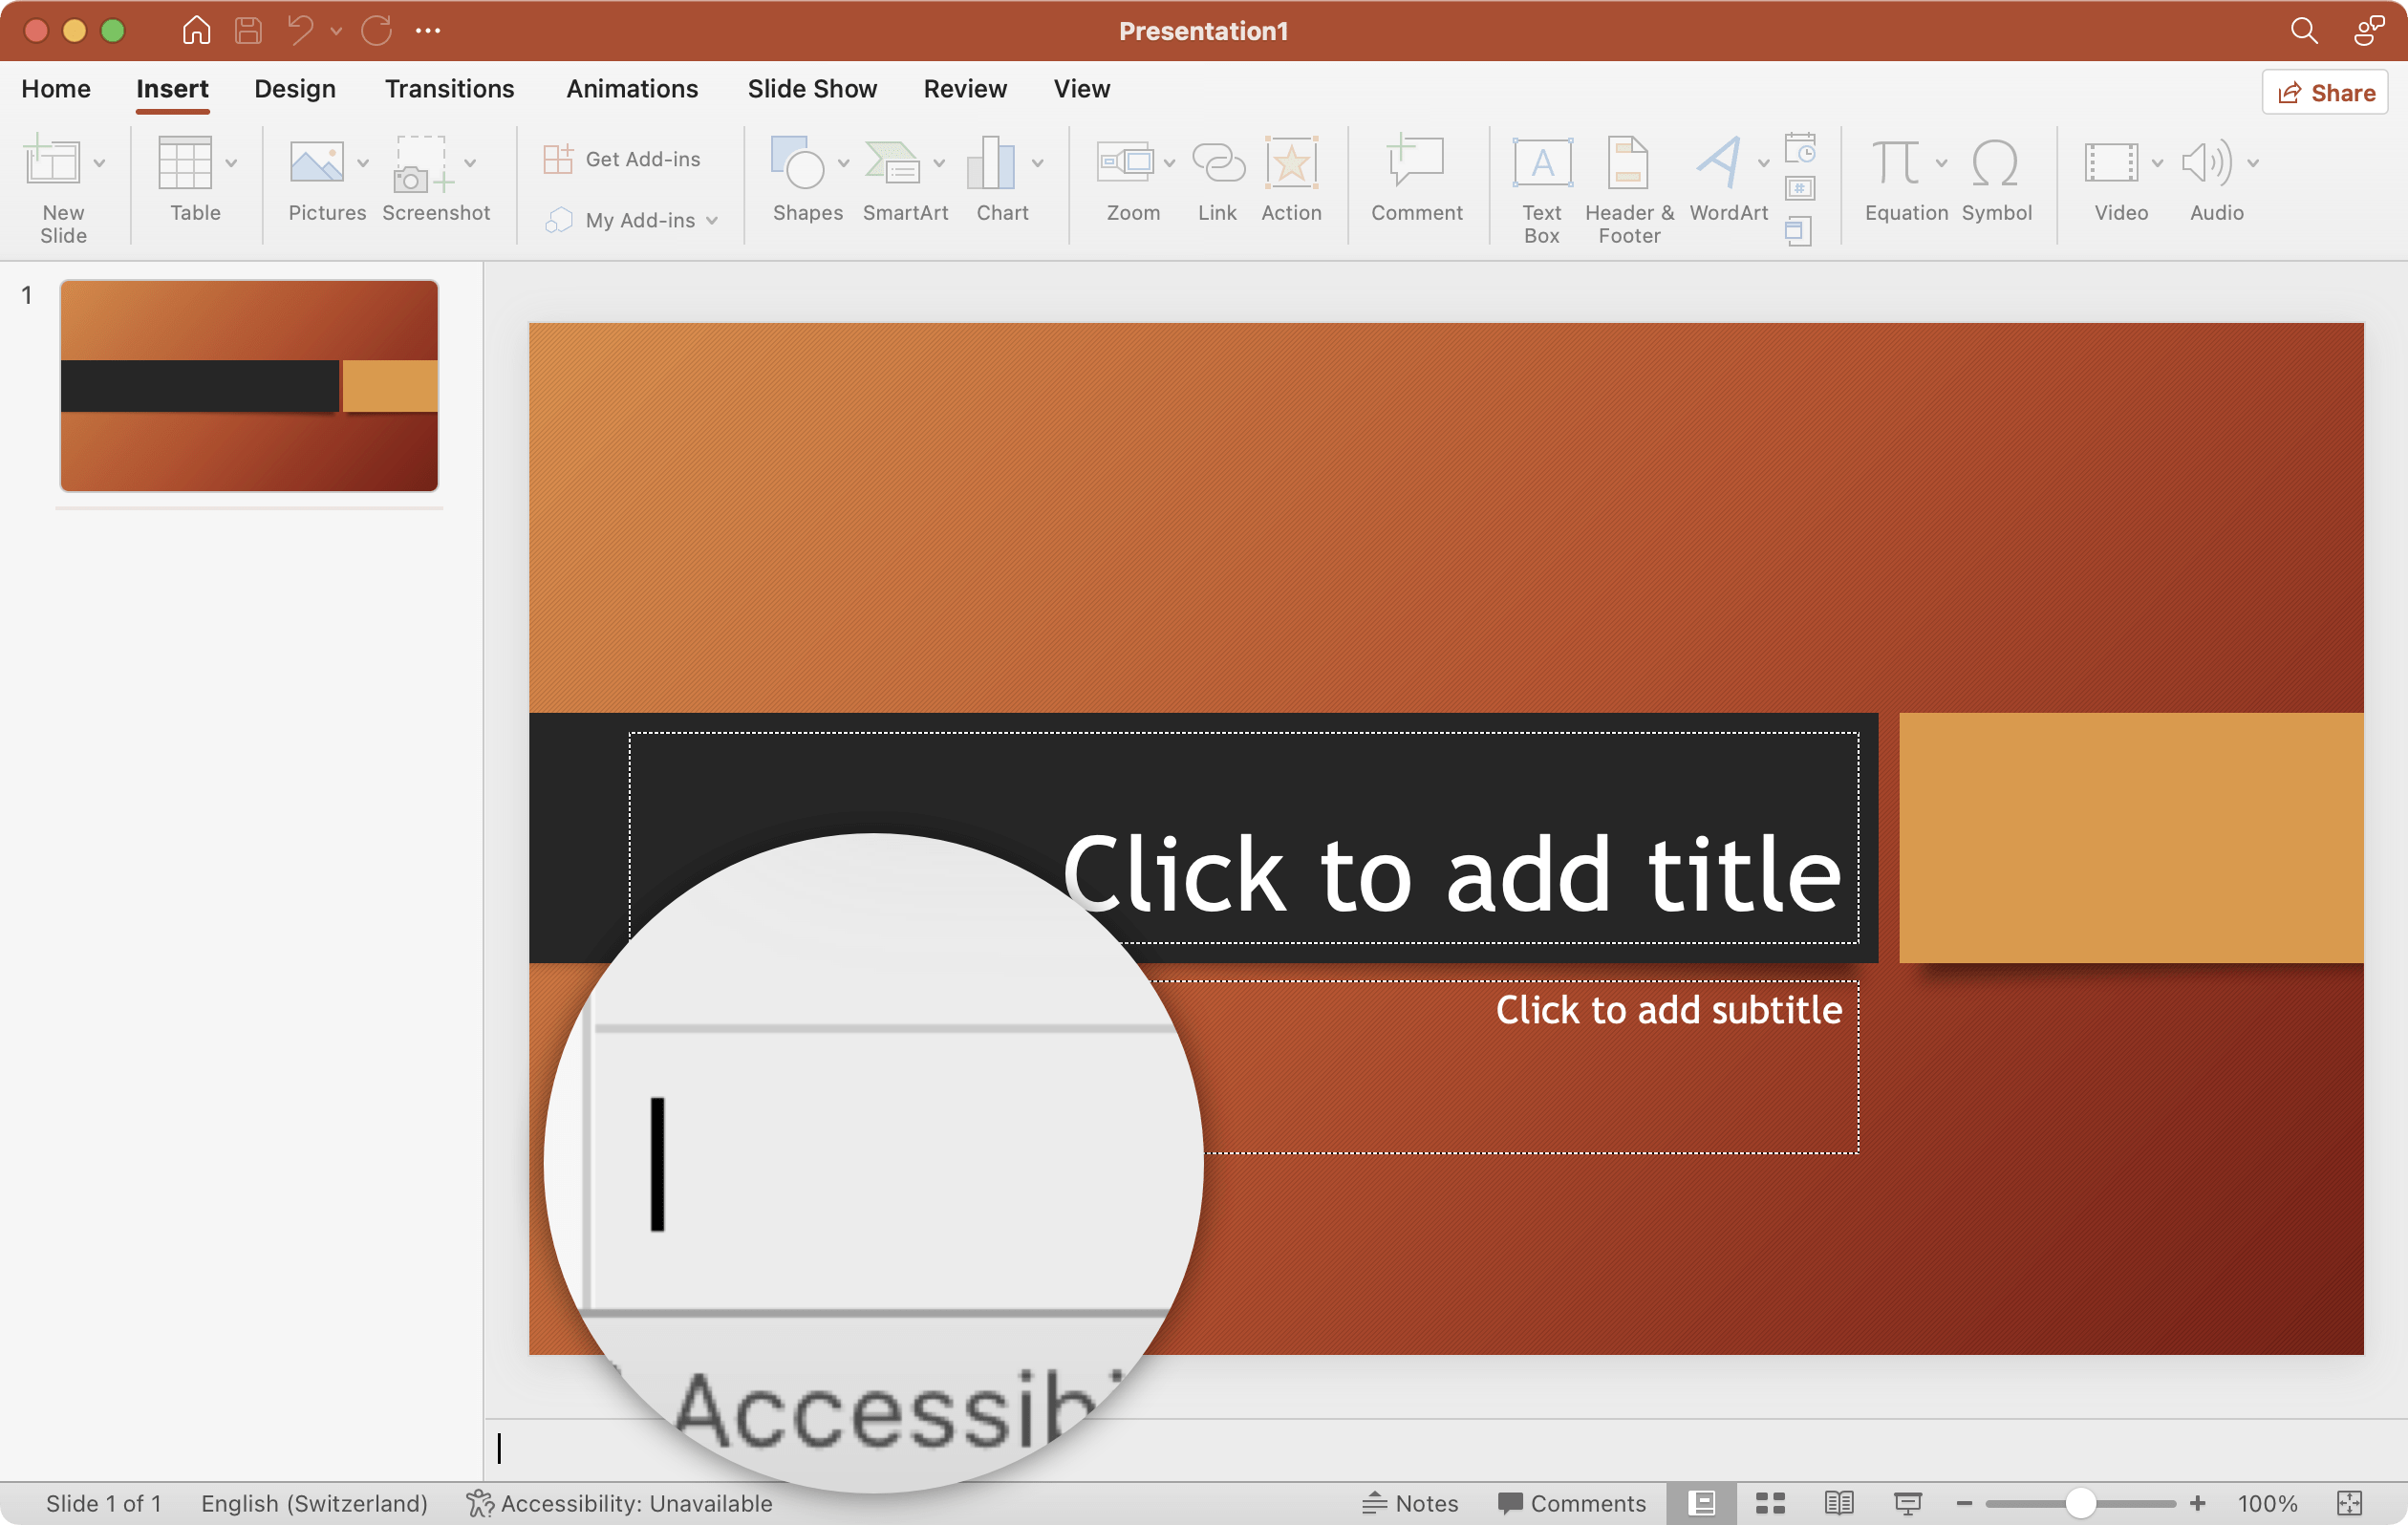 Keynote has given some attention to presentation notes. The font has a readable size and notes are displayed in a useful way when you present. In PowerPoint they are still hard to spot and the font is small.